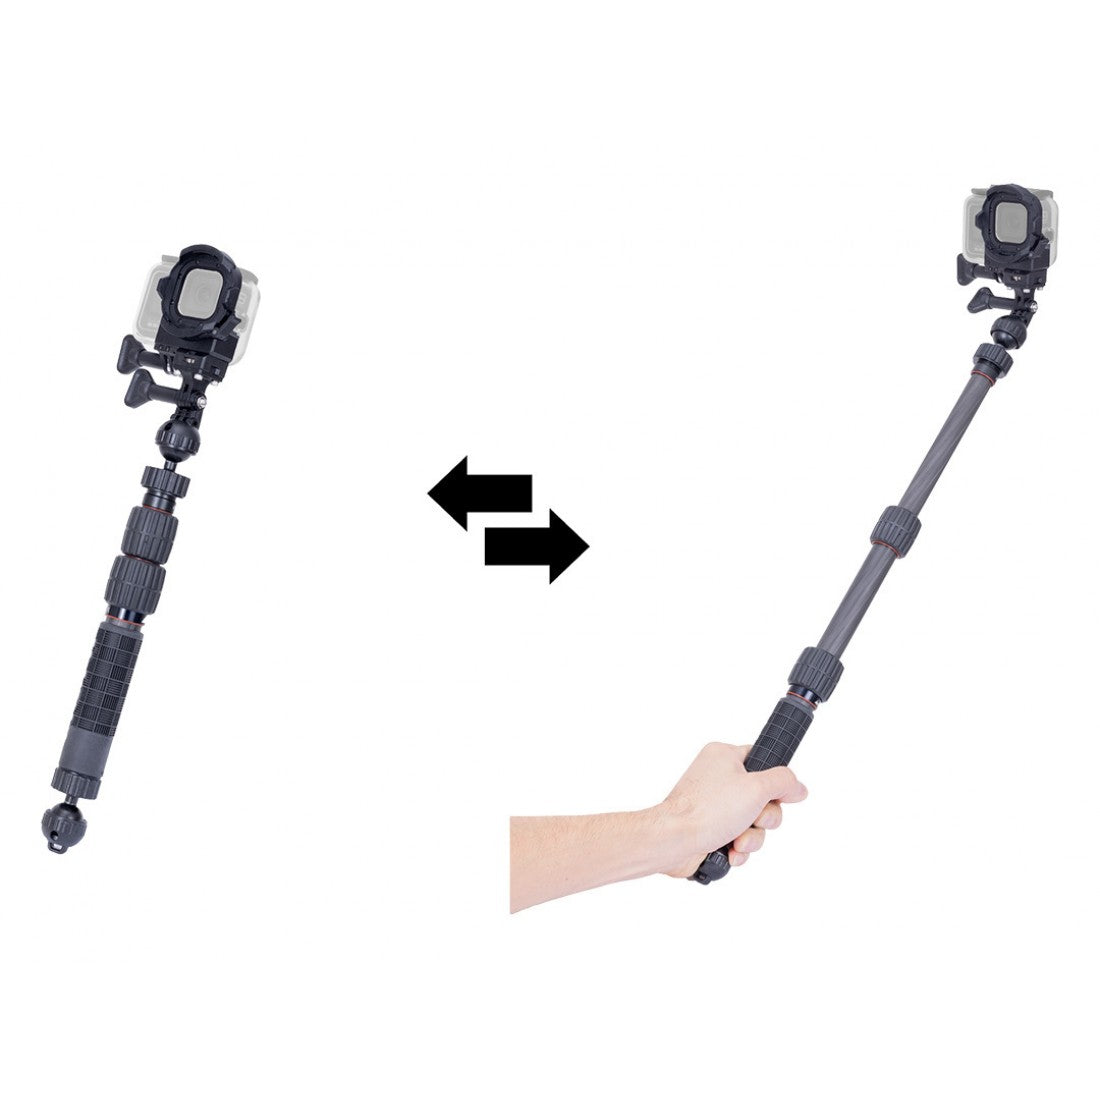 Selfie Set L for GoPro (Carbon Telescopic Arm L, Ball Adapter for GoPro)